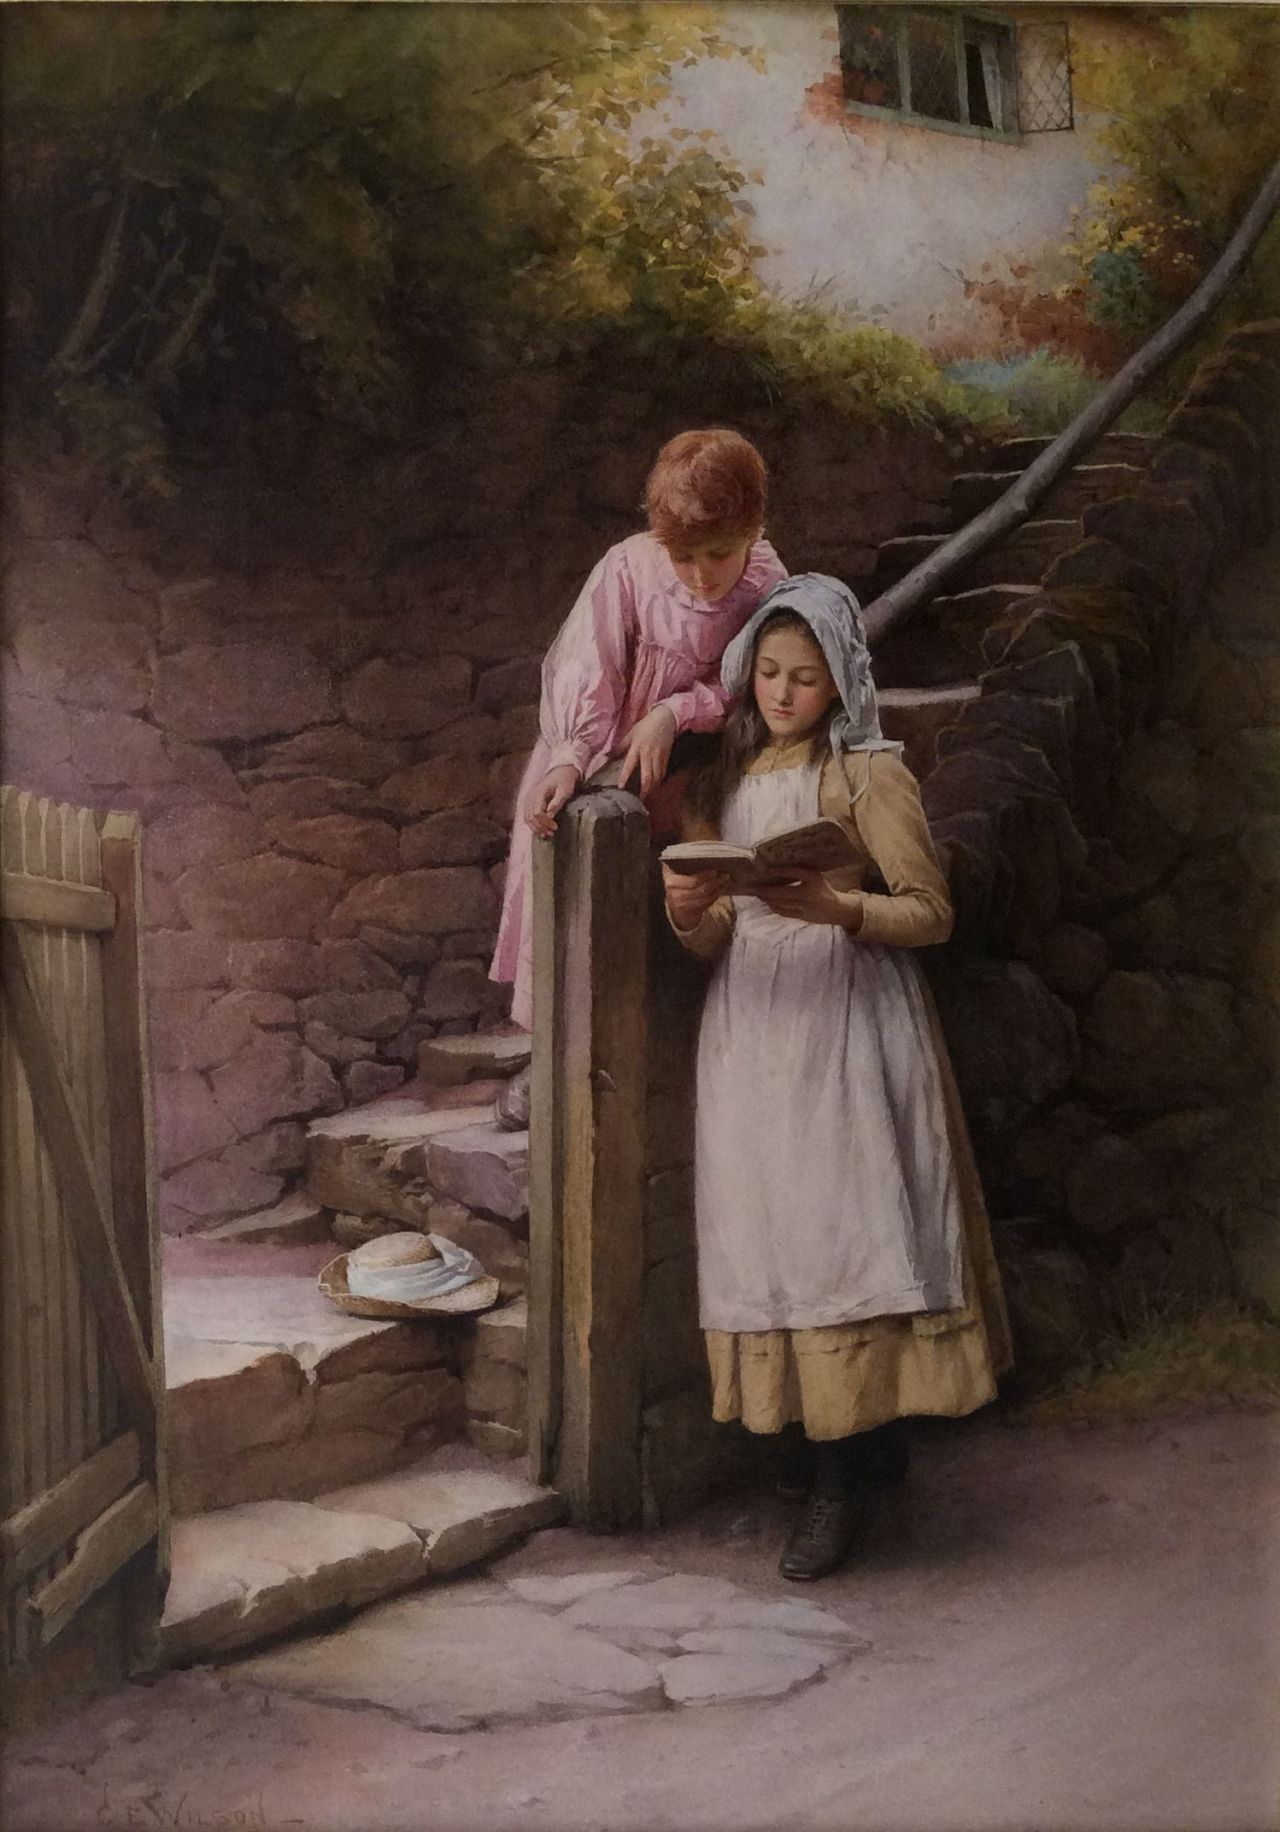 The Story Book. Charles Edward Wilson (English, 1854-1941). Watercolour.
Wilson’s career as a painter of rural subjects was defined when he saw the work of Frederick Walker at the Great Exhibition in Paris of 1879. He exhibited his first watercolour...